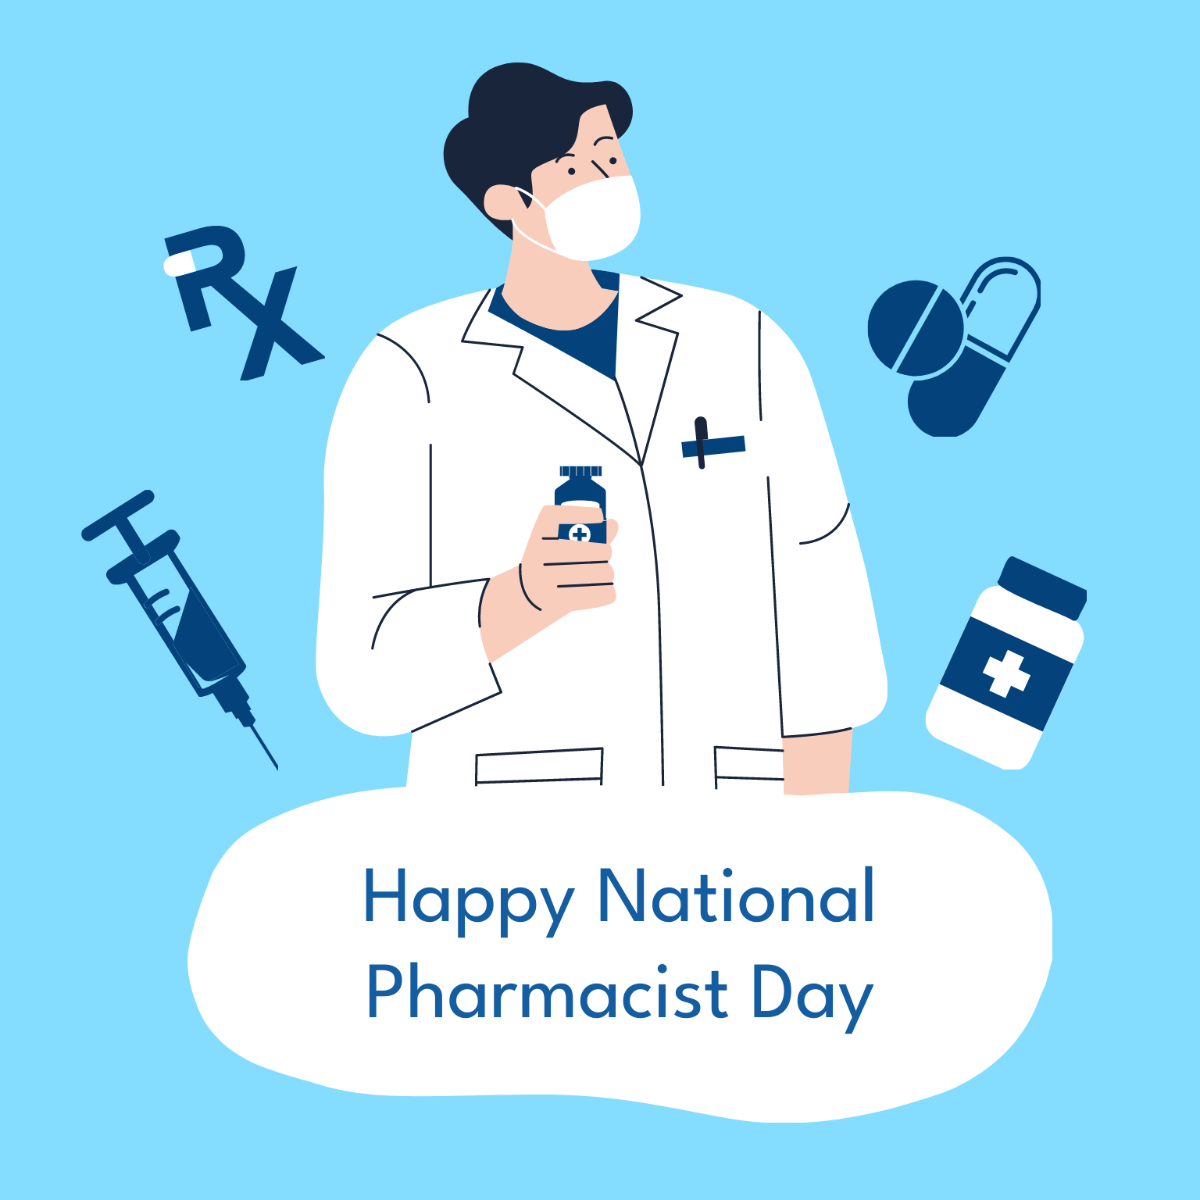 Free Happy National Pharmacist Day Illustration Template